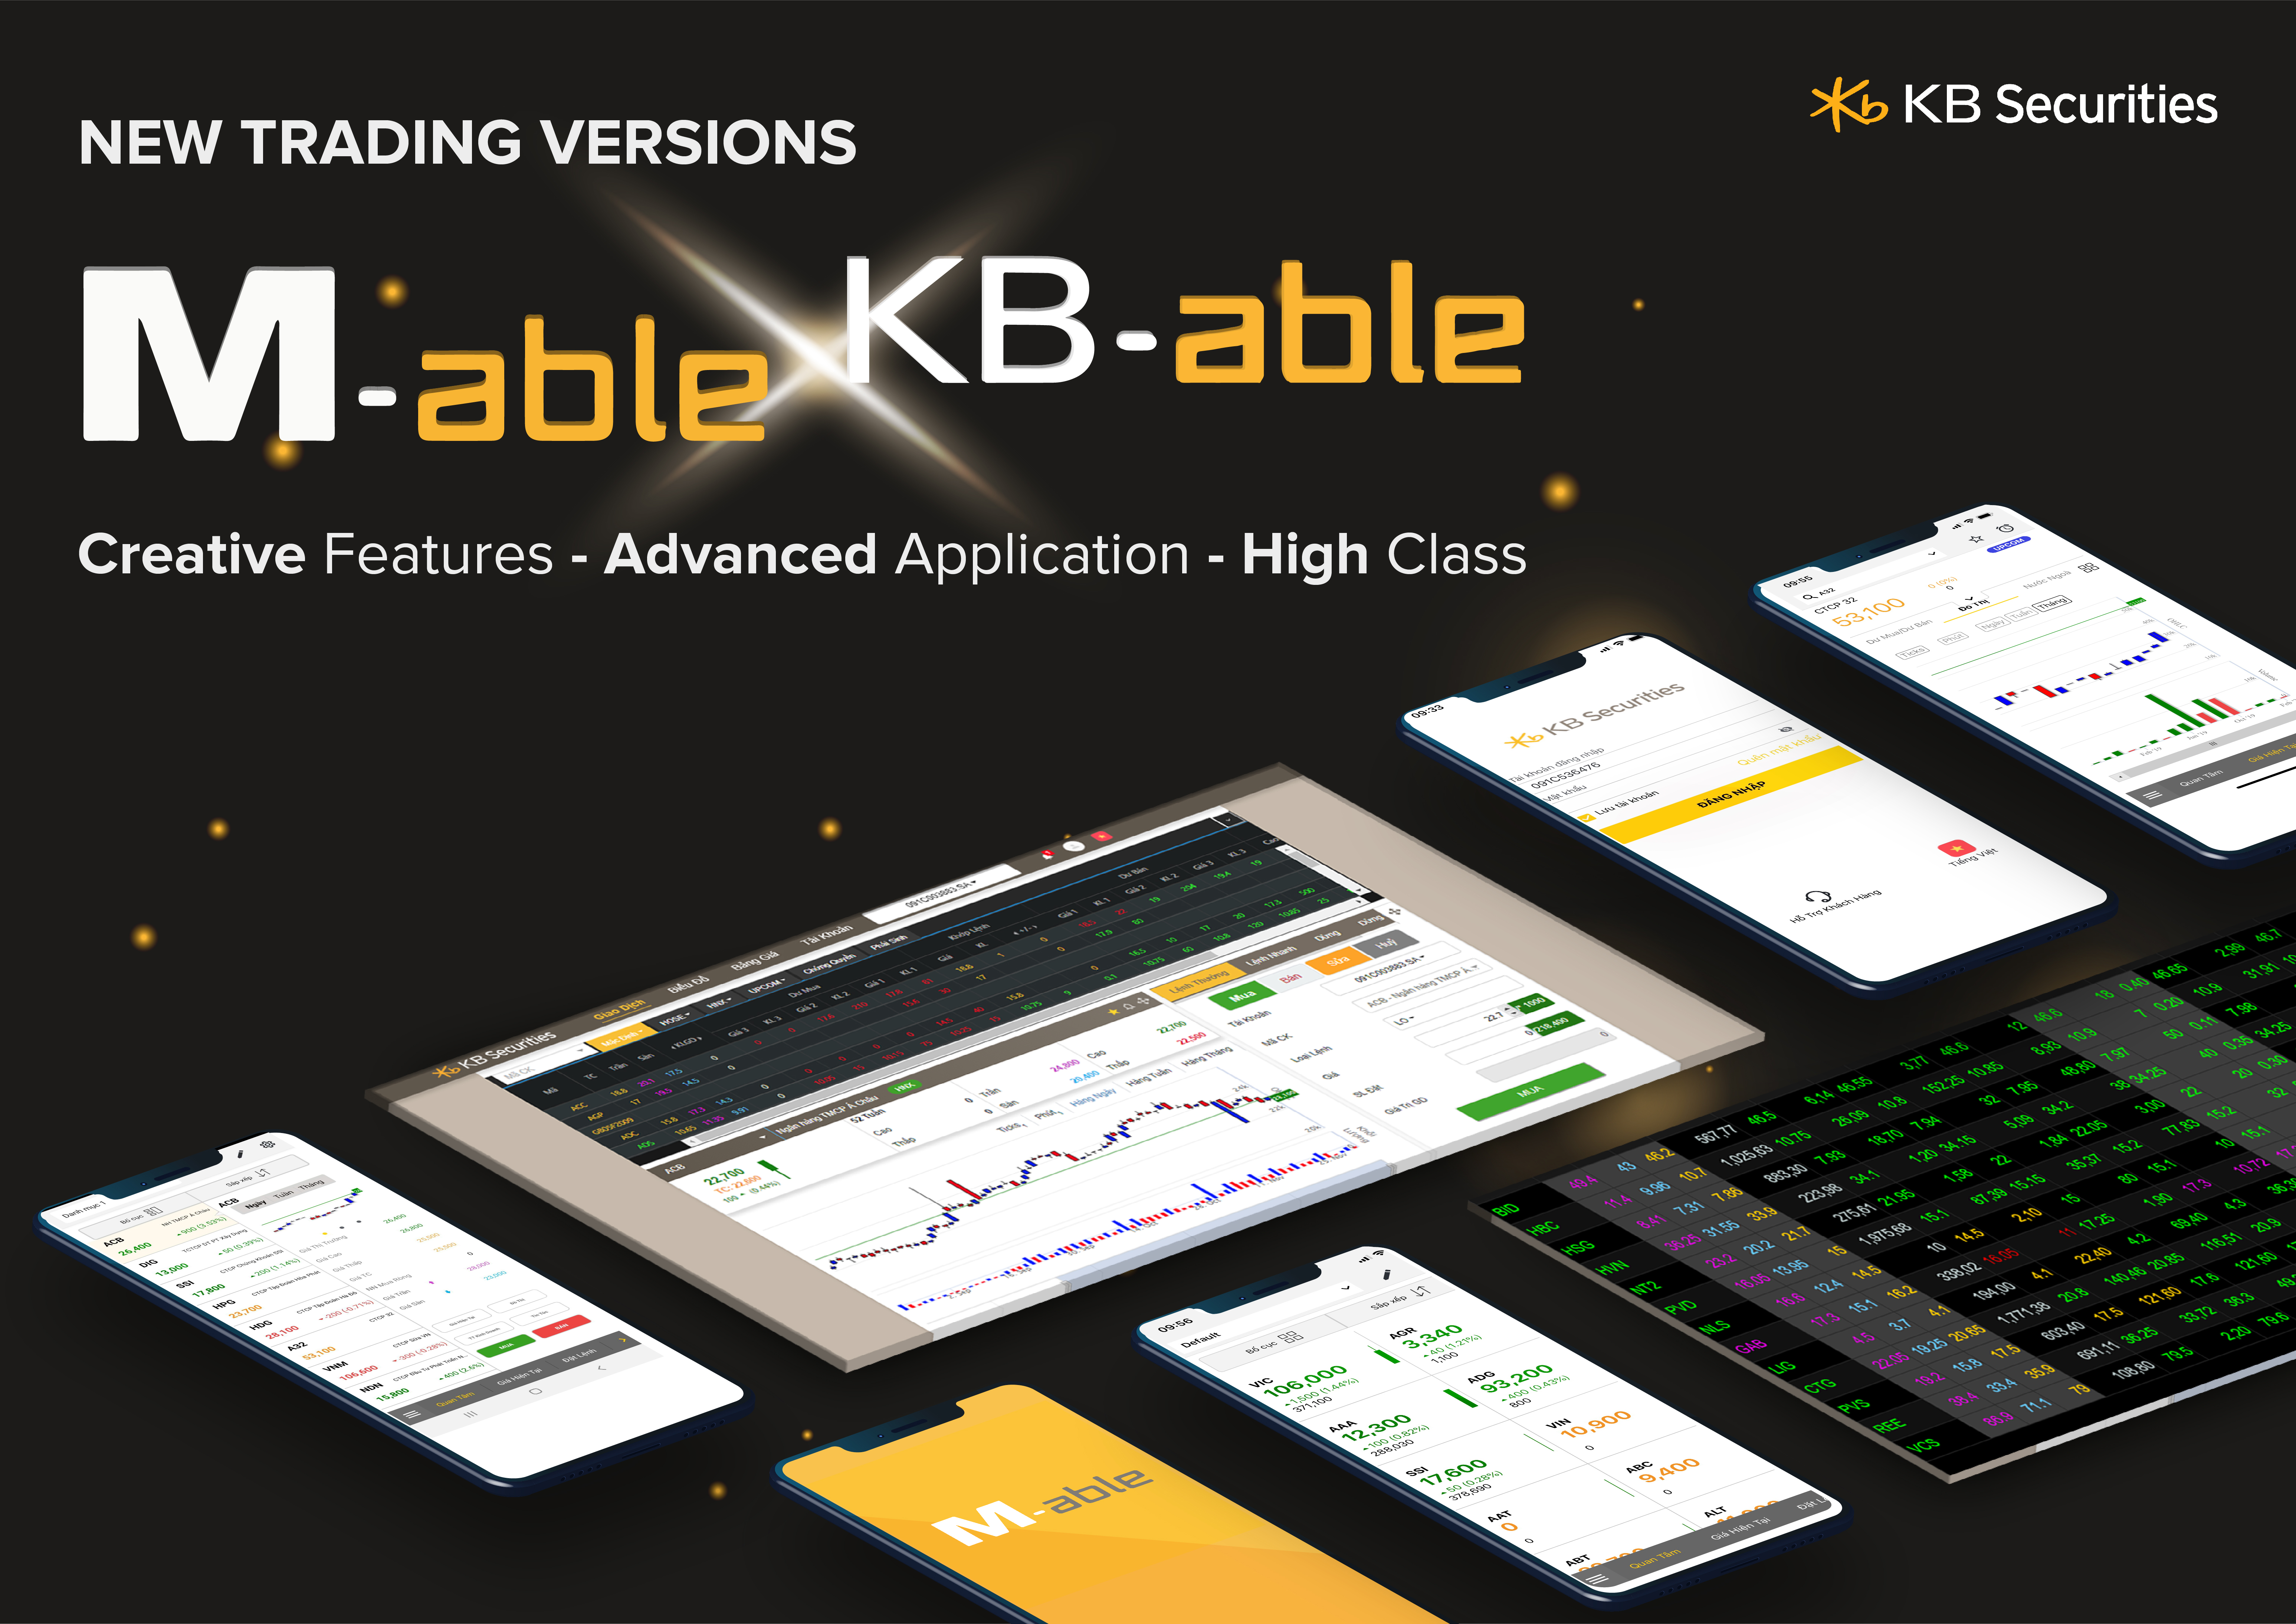 KBSV continued to launch mobile trading application M-able 